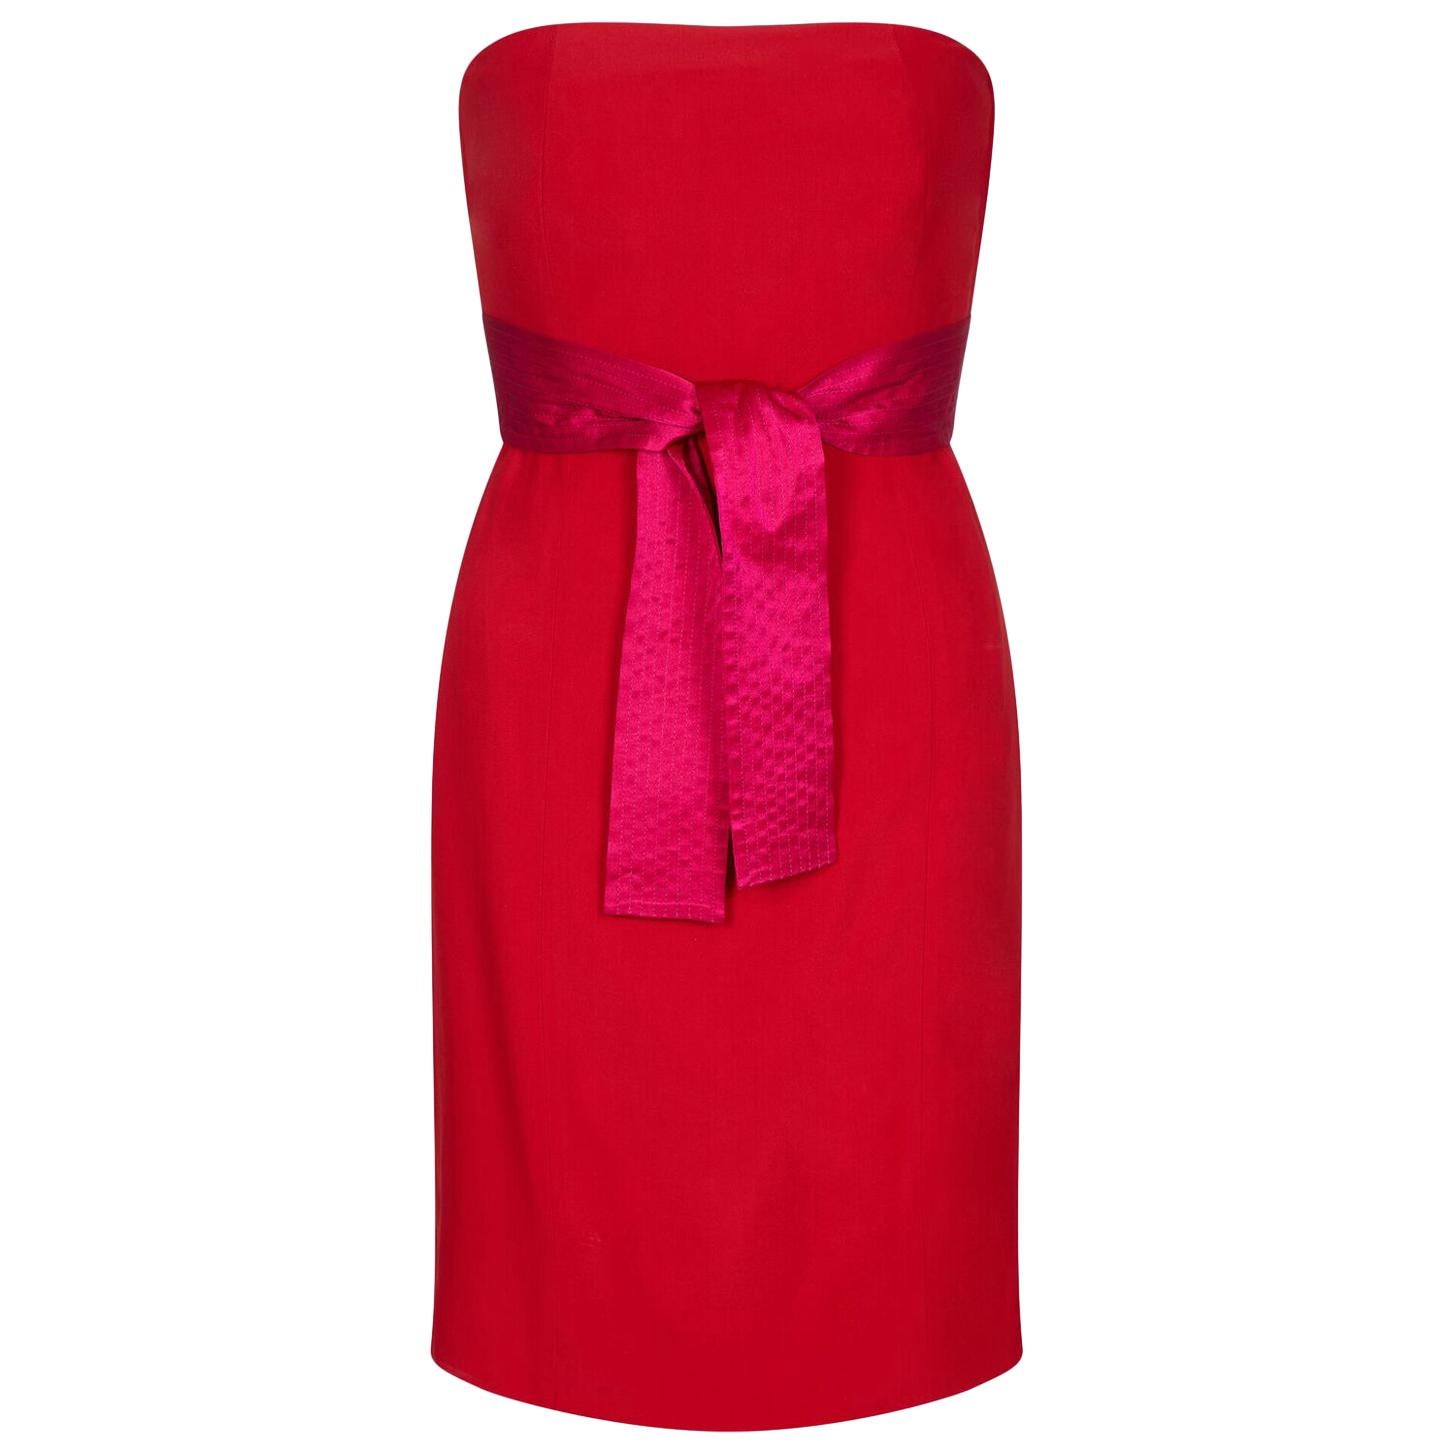 1980s Gianfranco Ferre Red Cocktail Dress With Pink Fan Detail For Sale